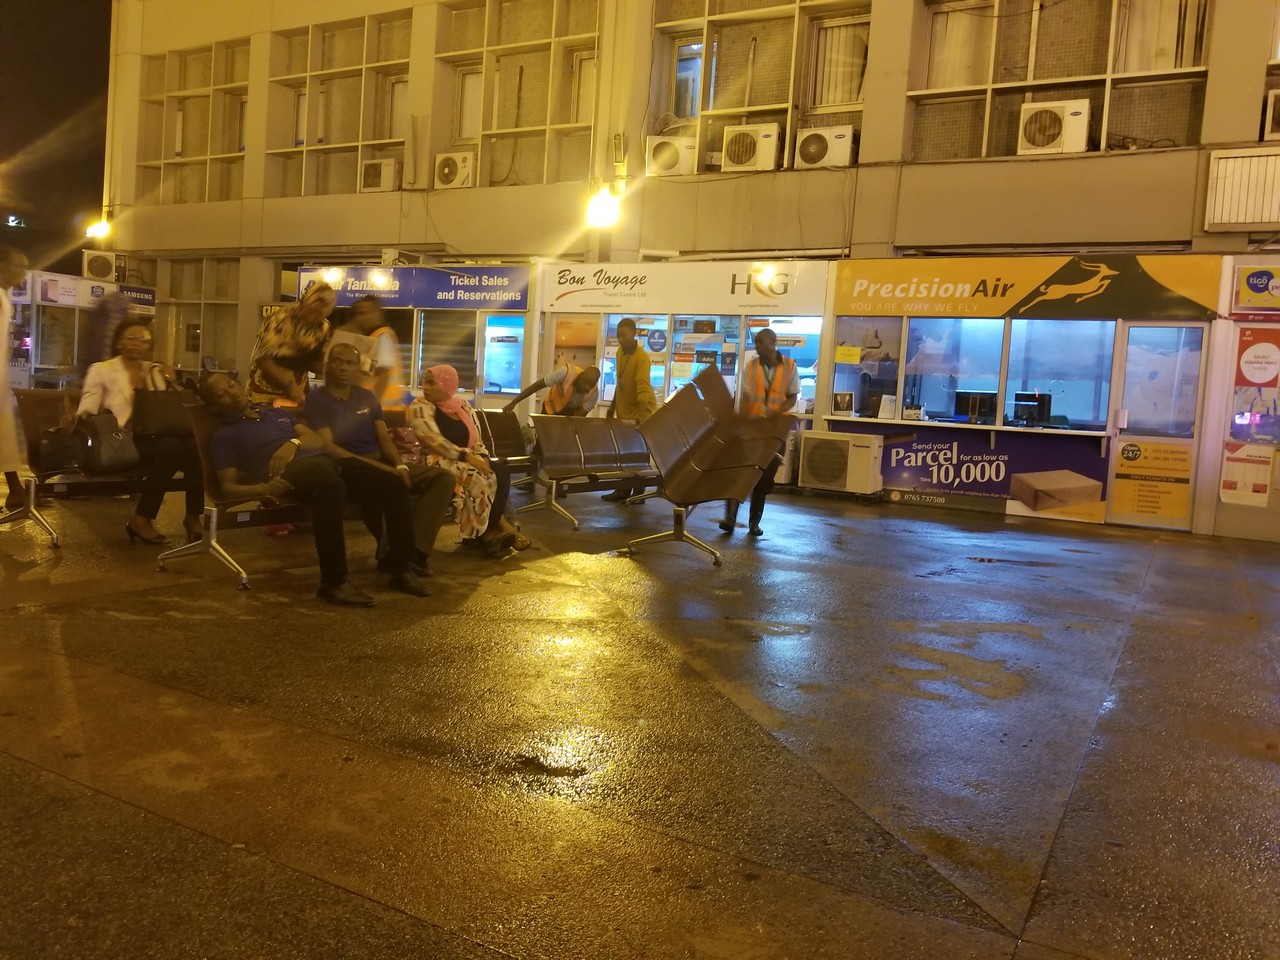 a group of people sitting on benches outside a building